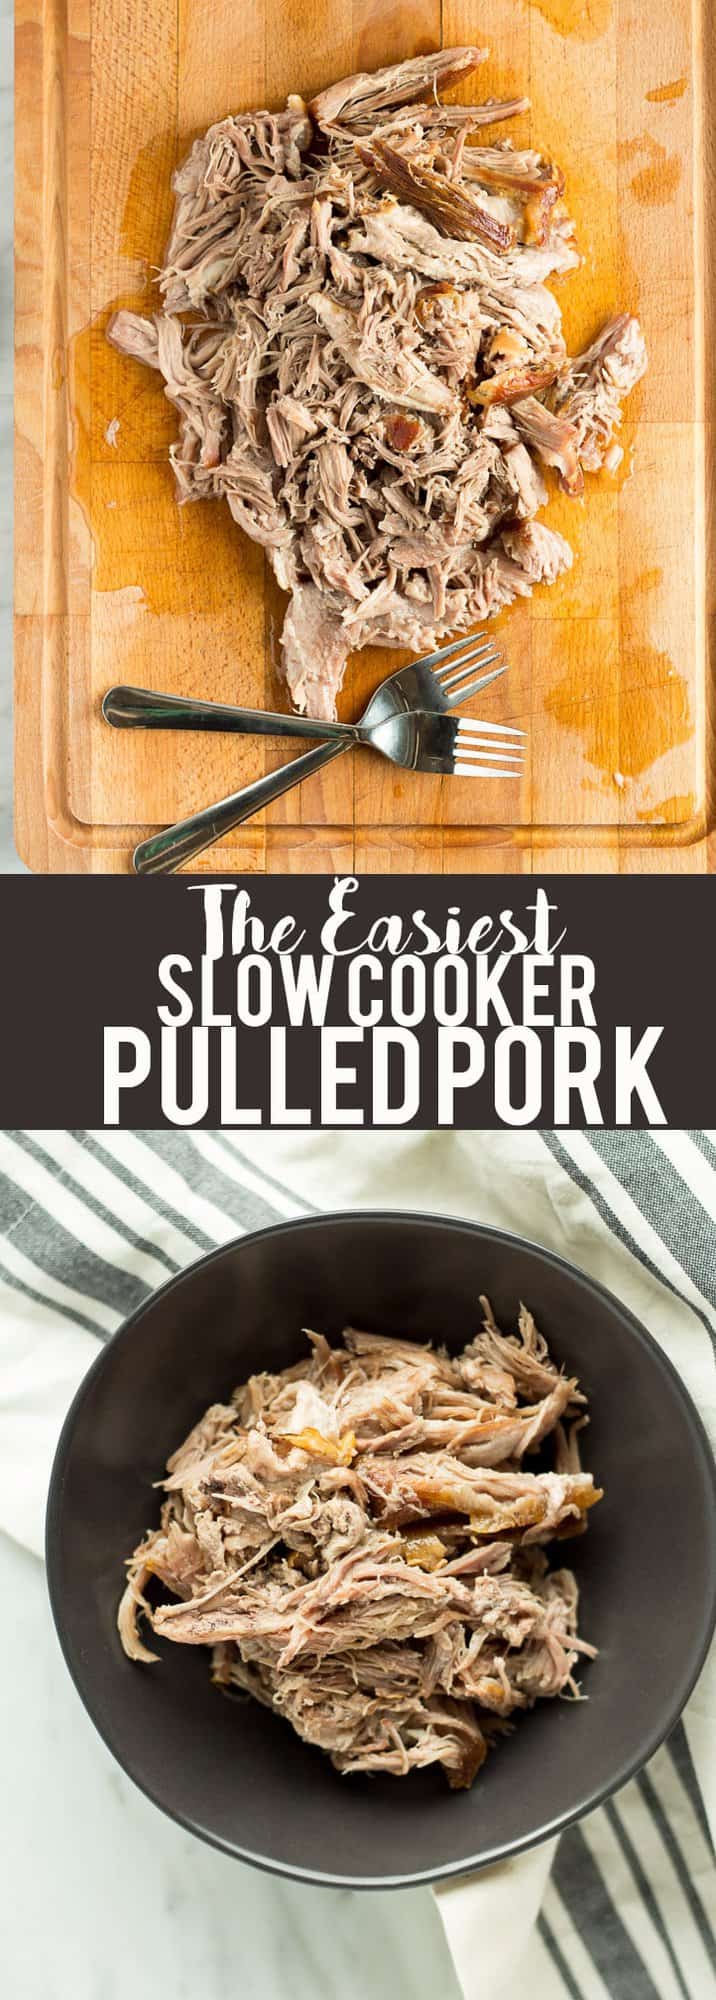 This is the easiest slow cooker pulled pork, but it tastes unbelievable! Make a huge batch and freeze some of it to put on sandwiches or pizza, in soup, tacos, fried rice and more! 